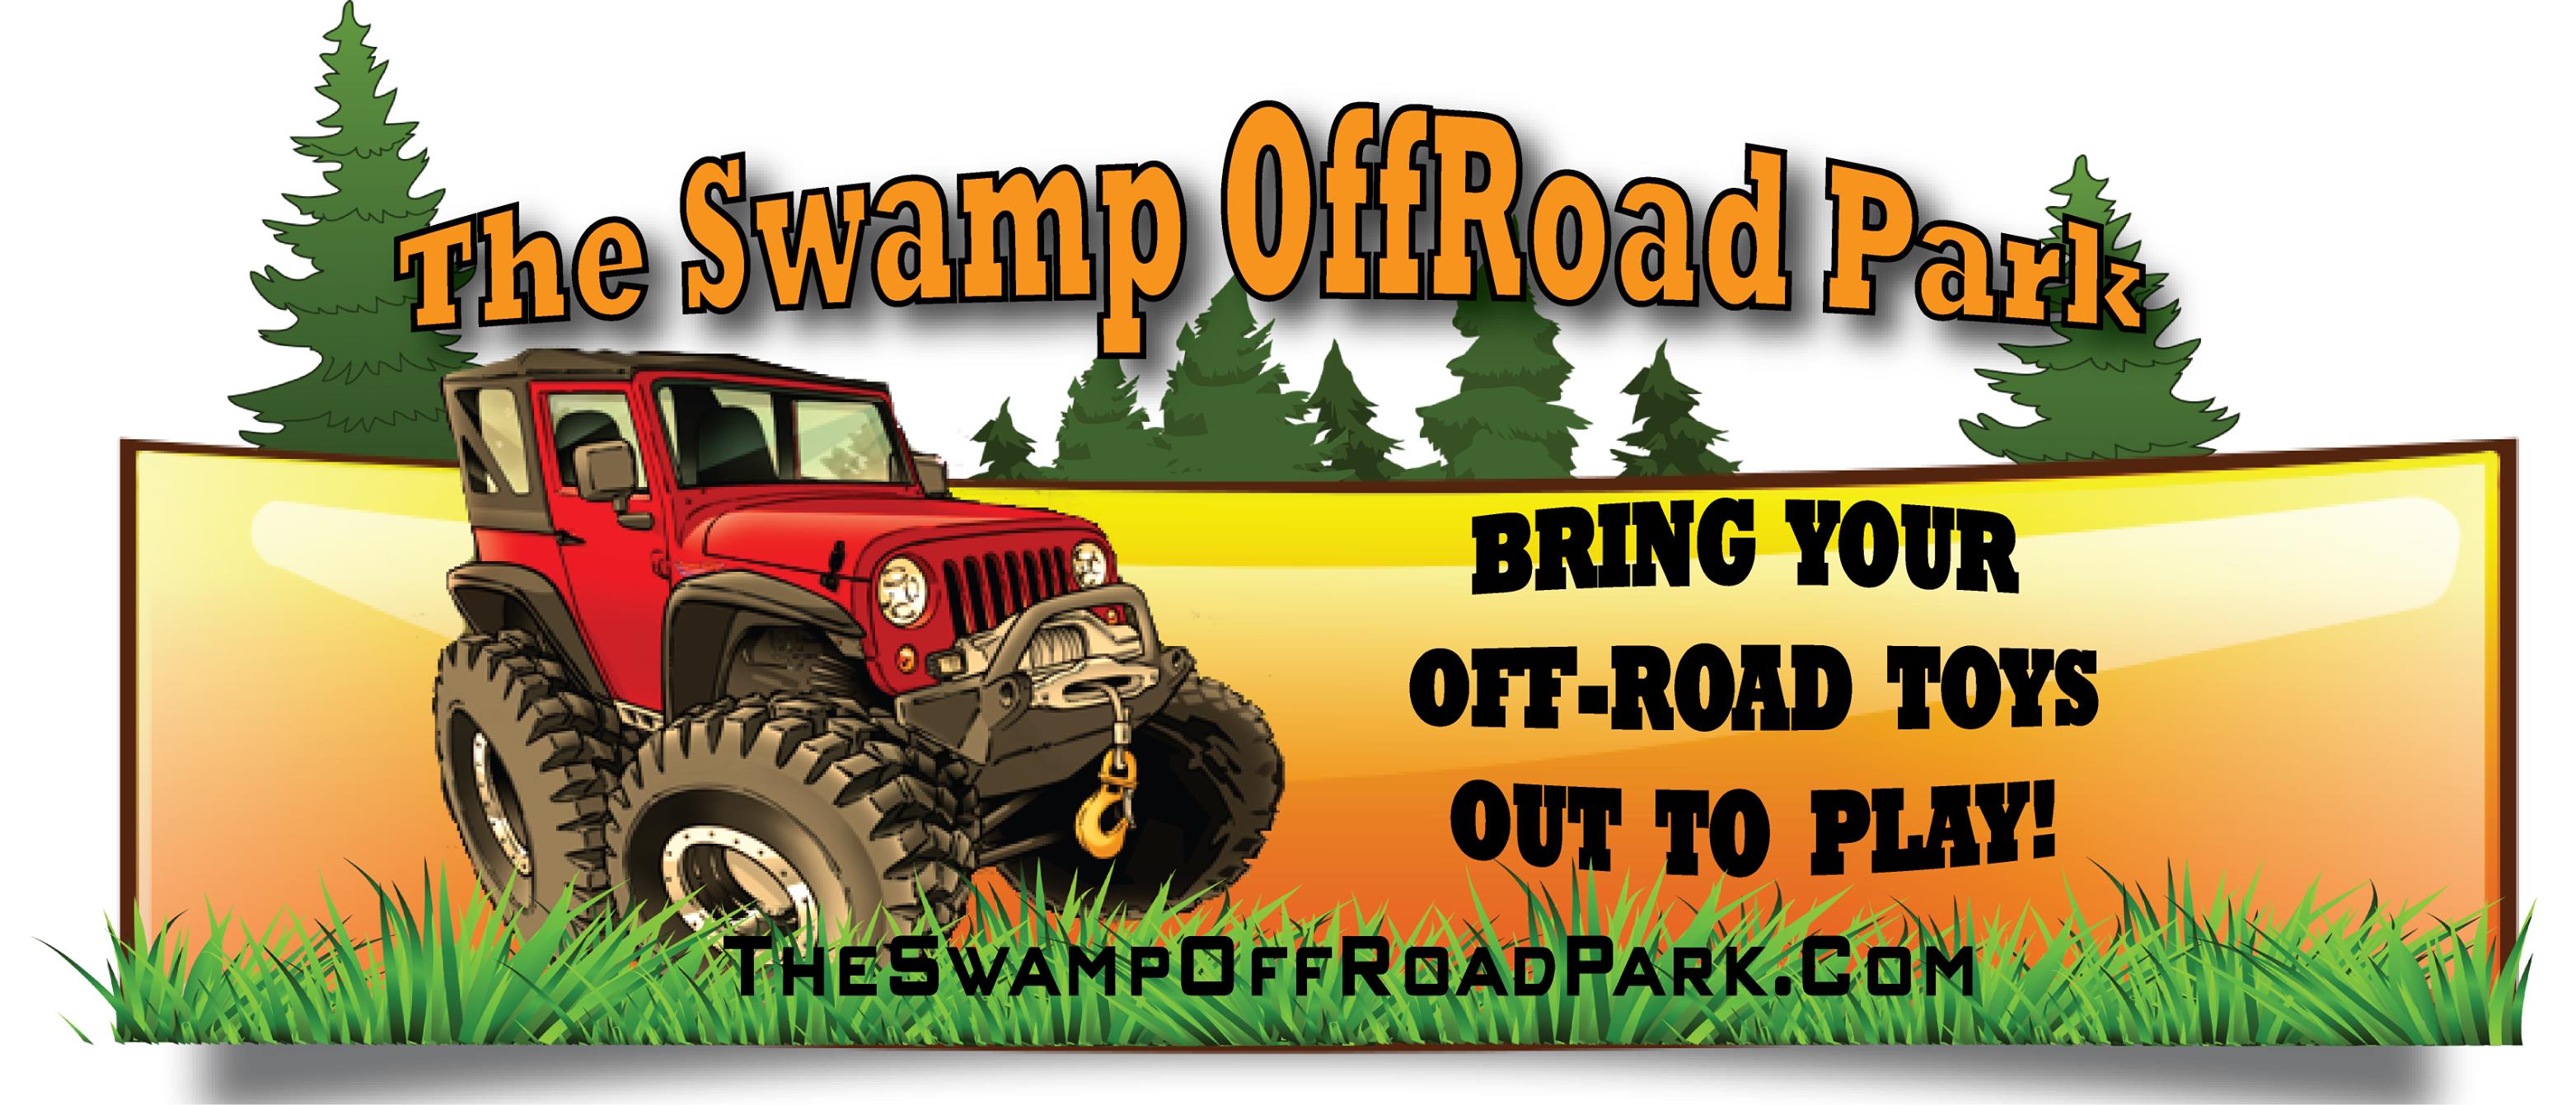 The Swamp OffRoad Park Logo